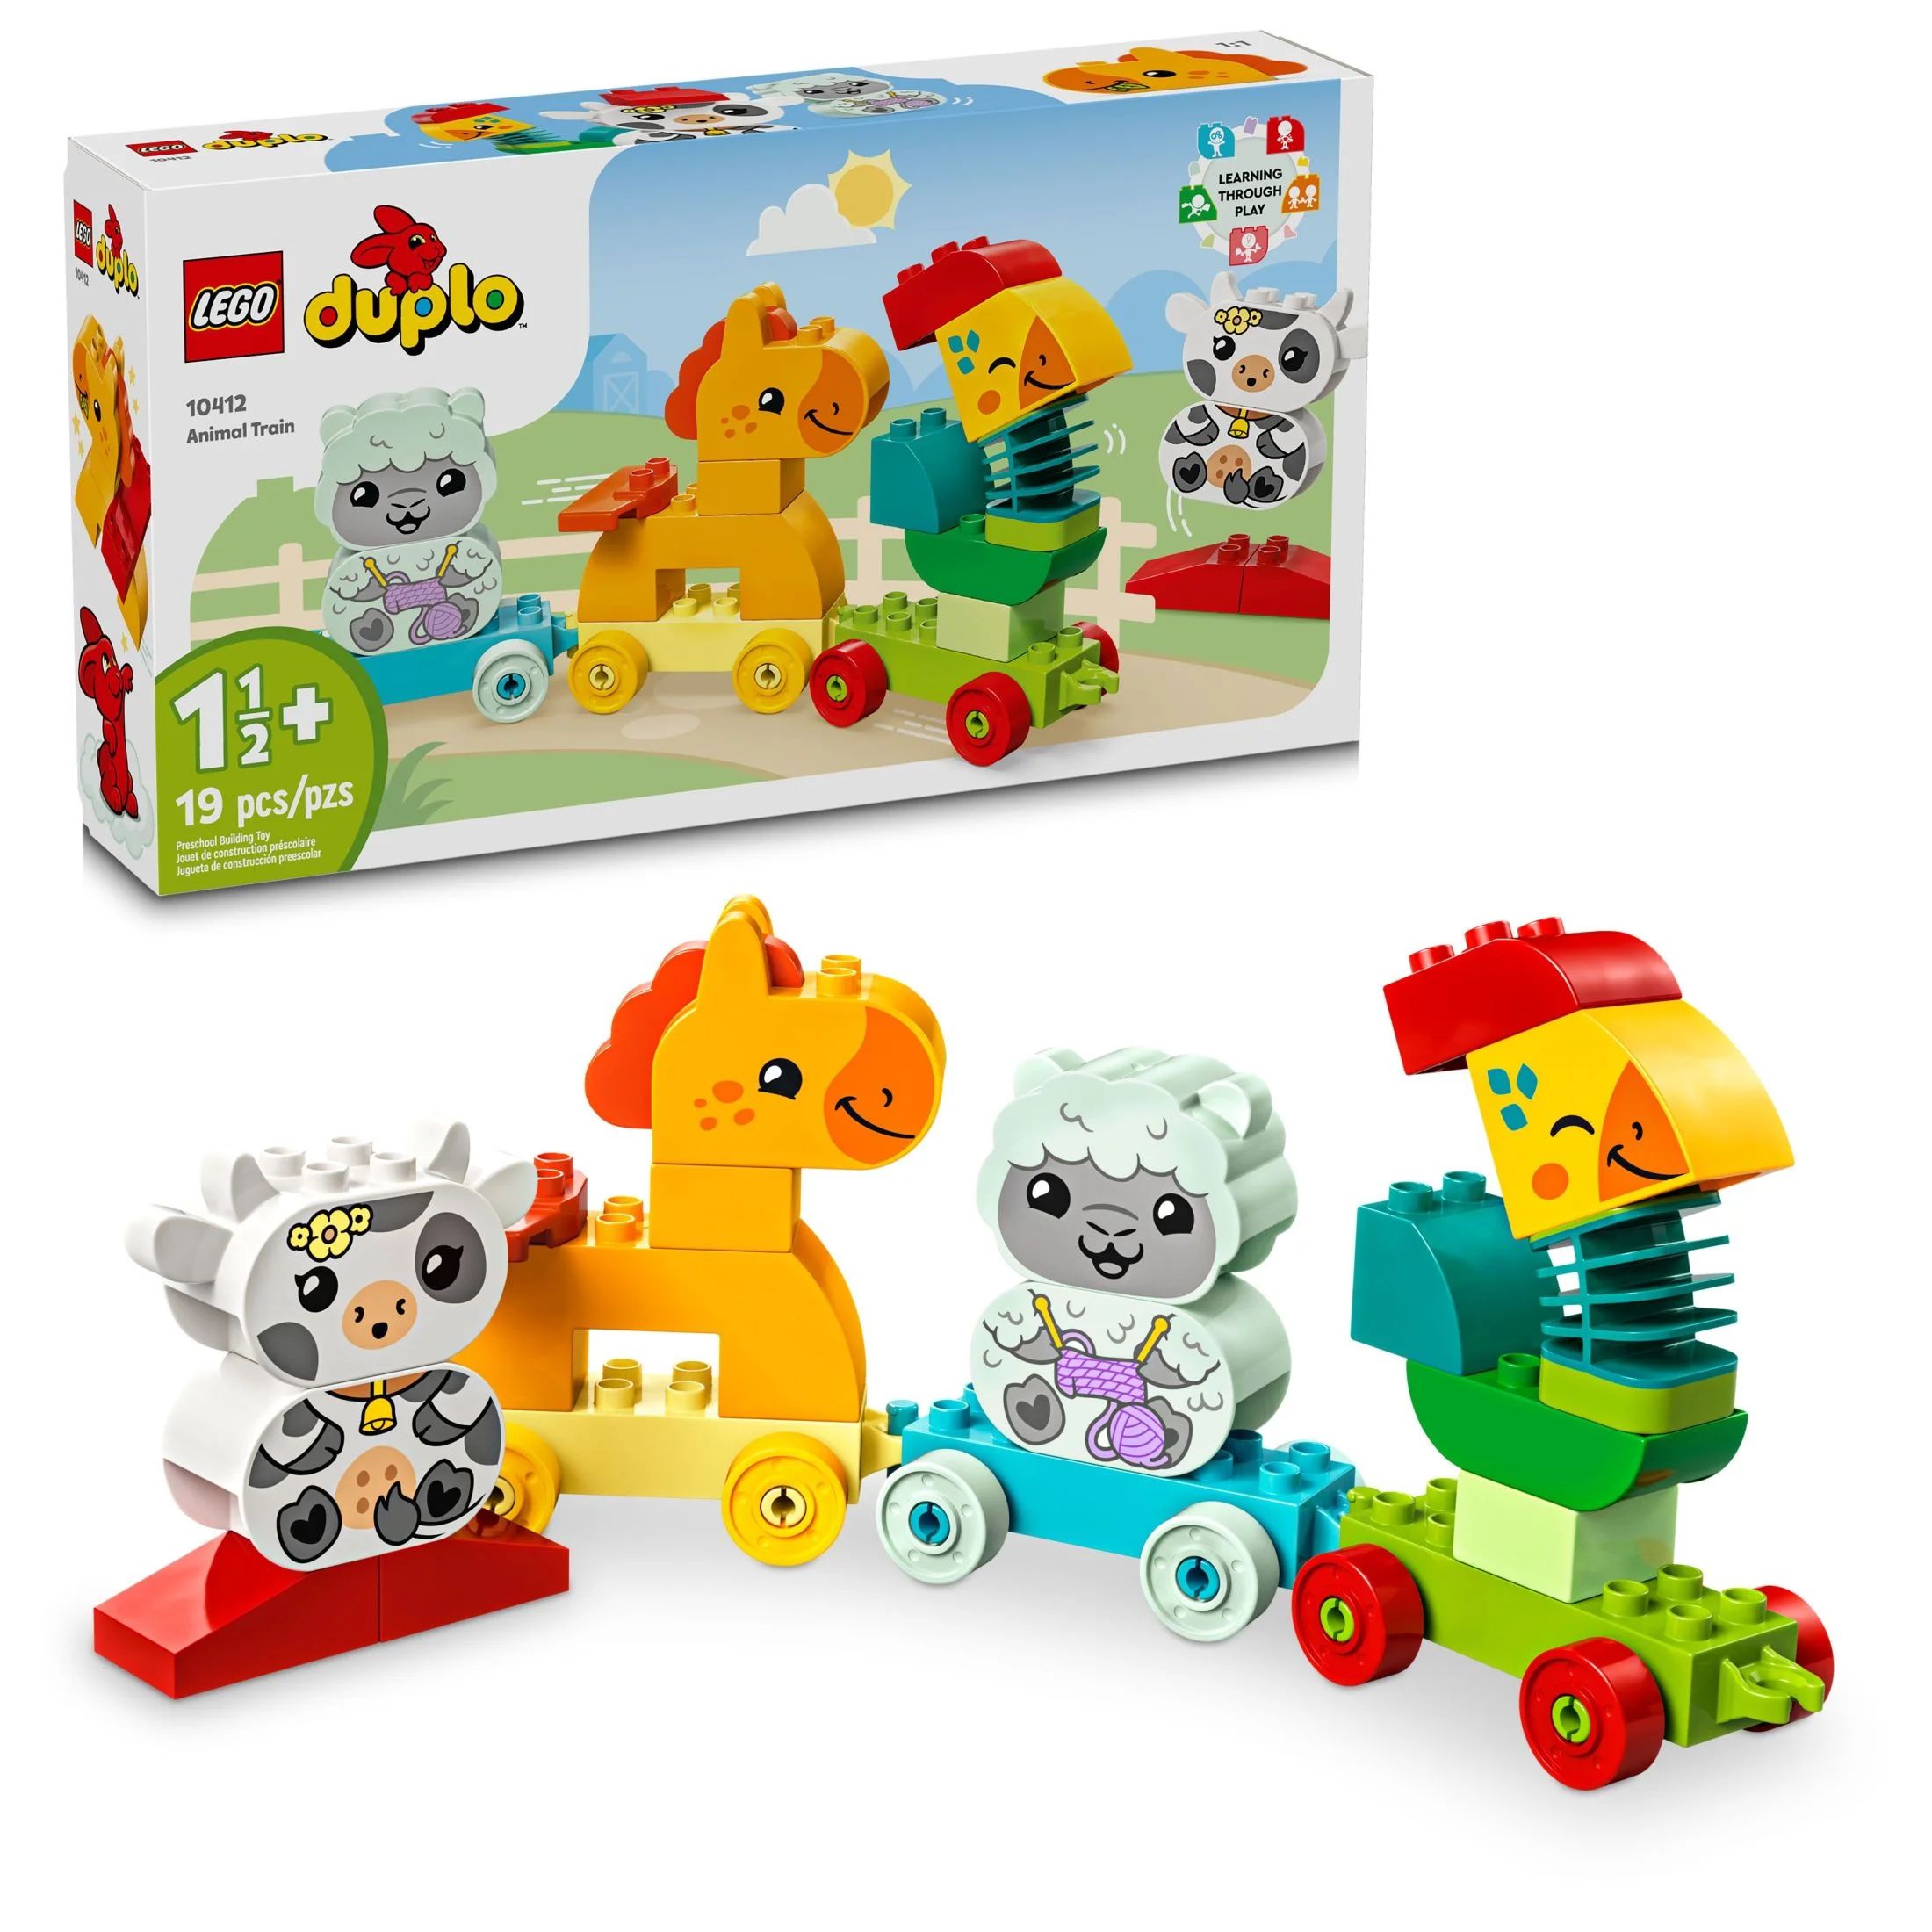 LEGO DUPLO My First Animal Train Building Set and Horse Toy, Educational Toy for Toddlers Ages 1-... | Walmart (US)